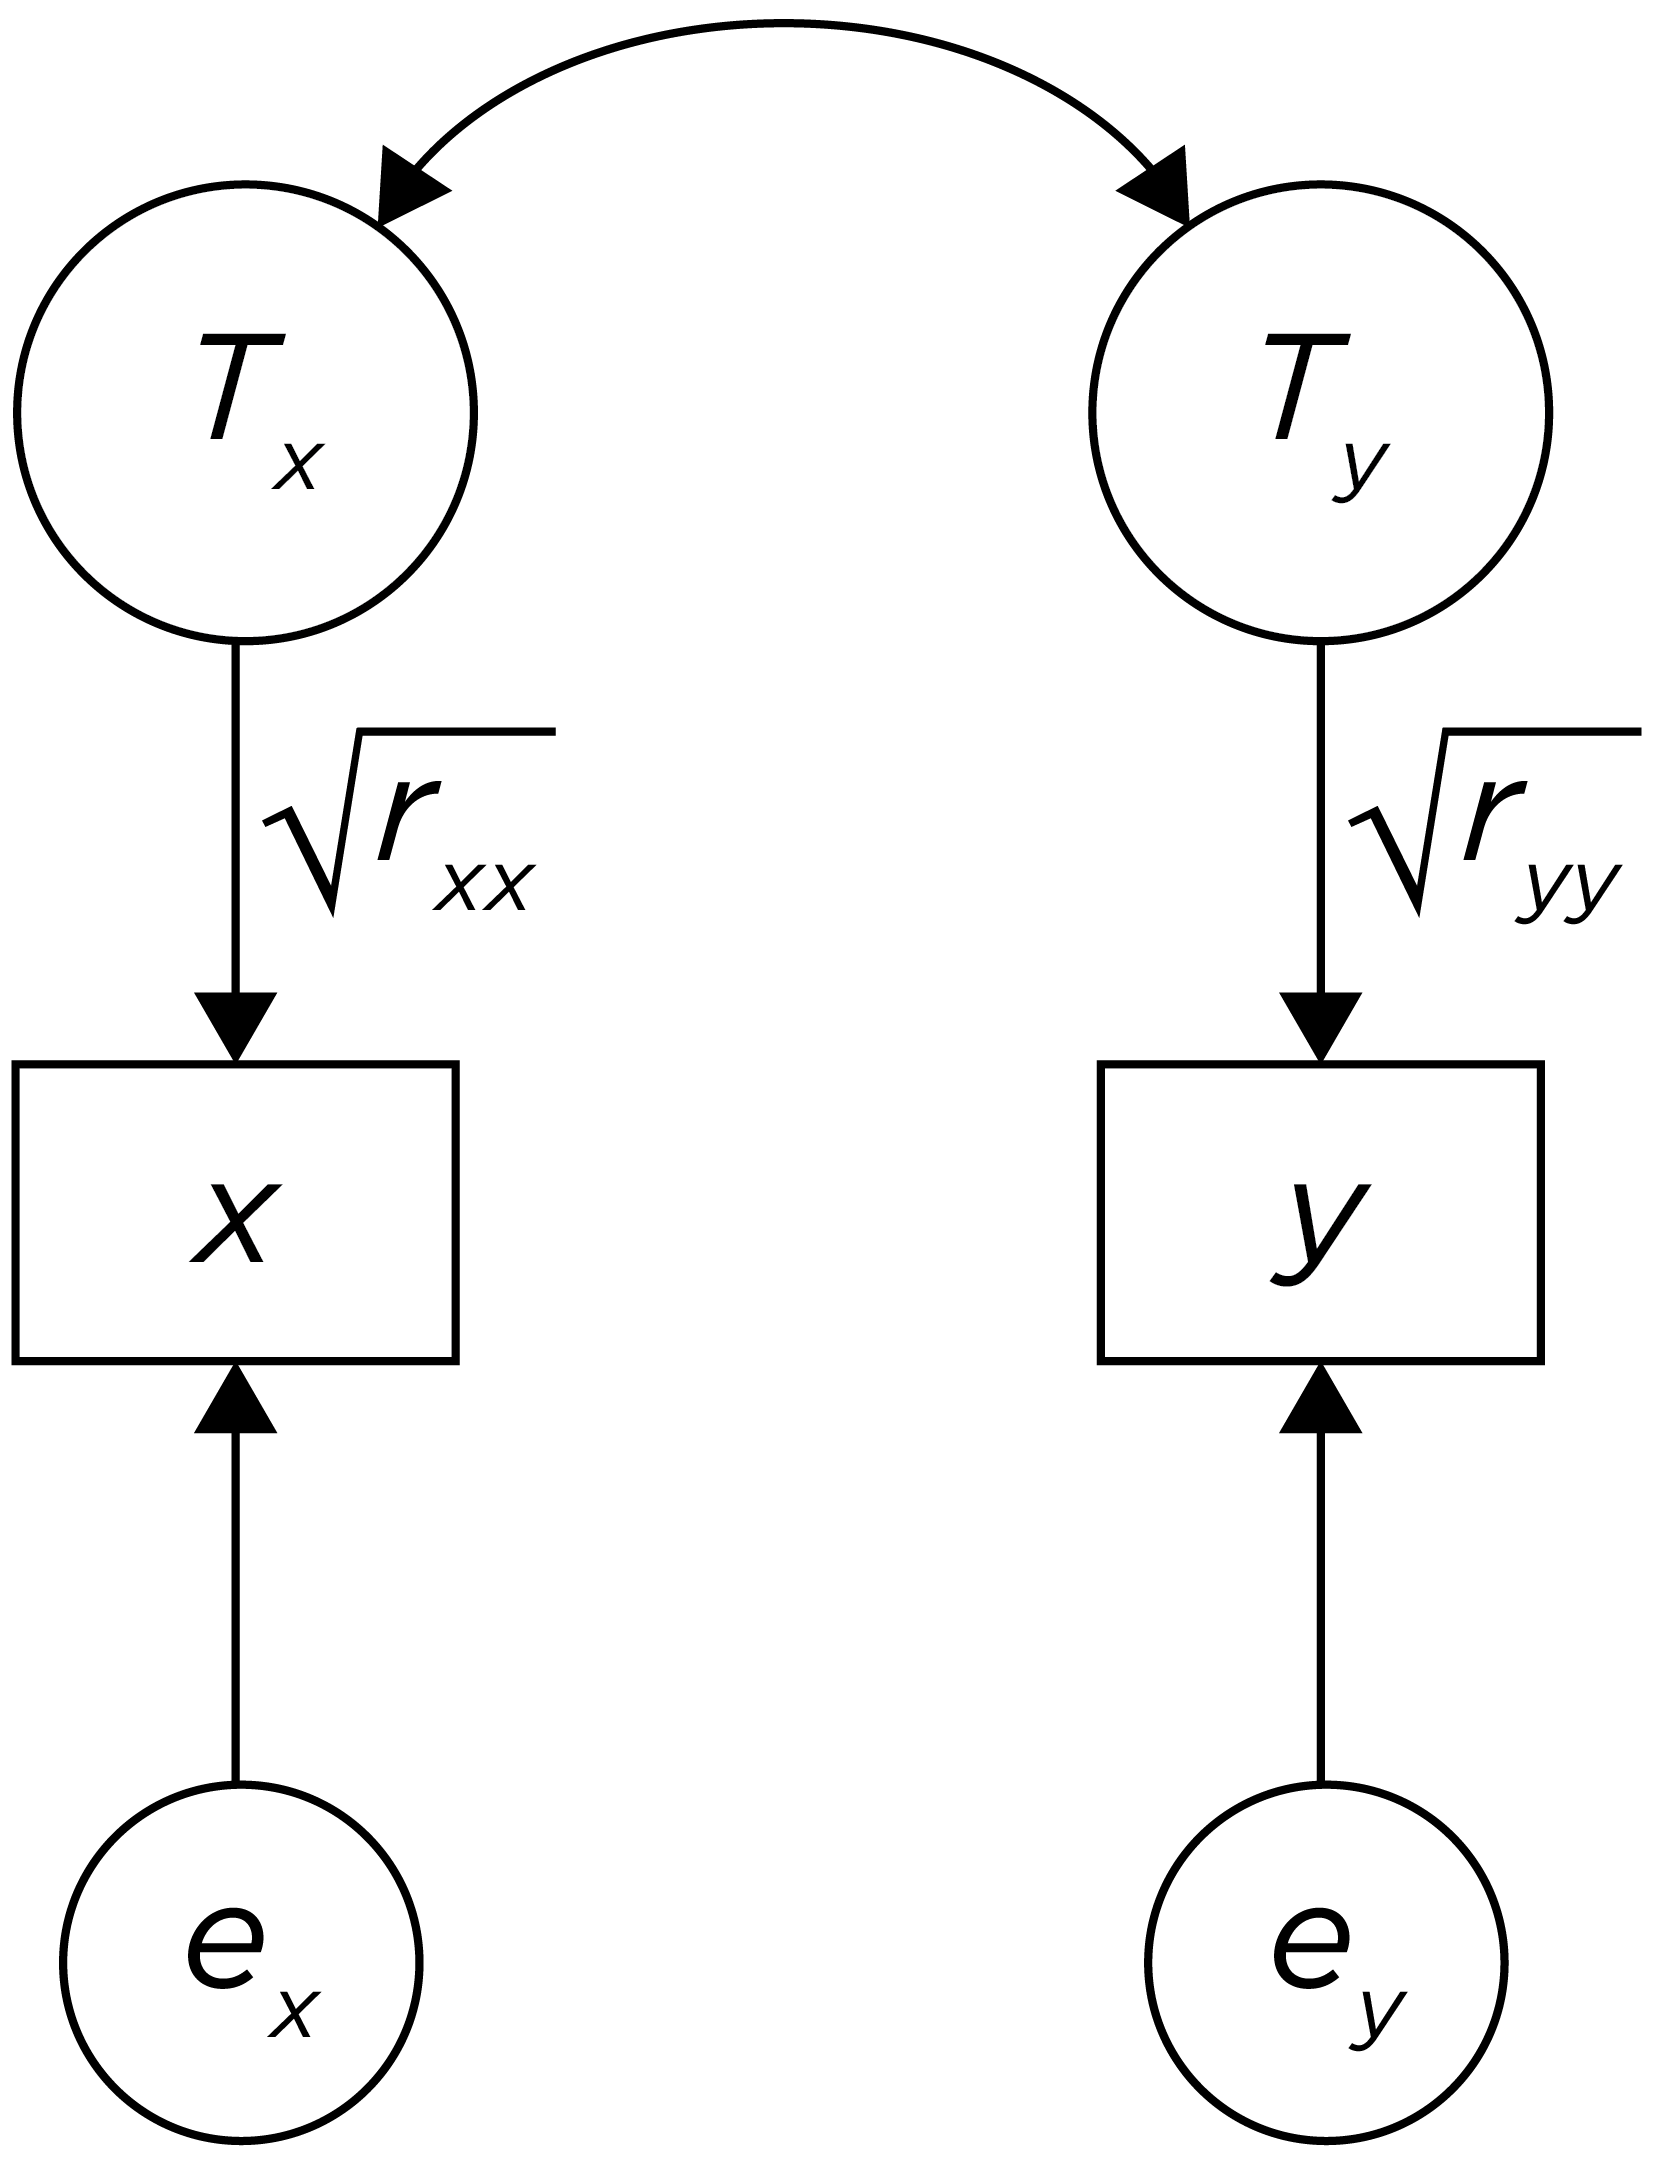 The Criterion-Related Validity of a Measure, i.e., Its Association With Another Measure, as Depicted in a Path Diagram.